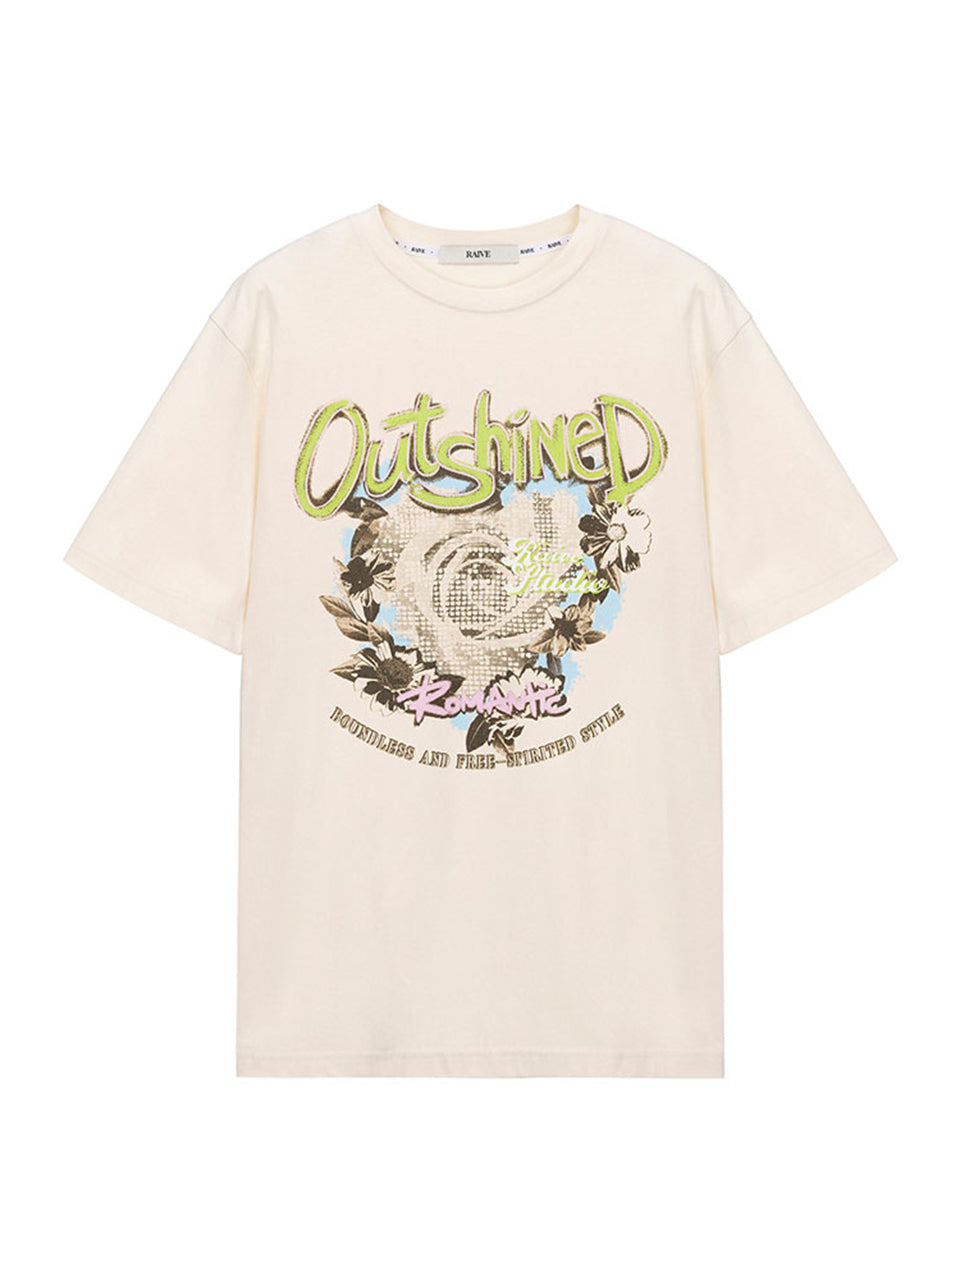 Outshined Graphic T-shirt in Cream